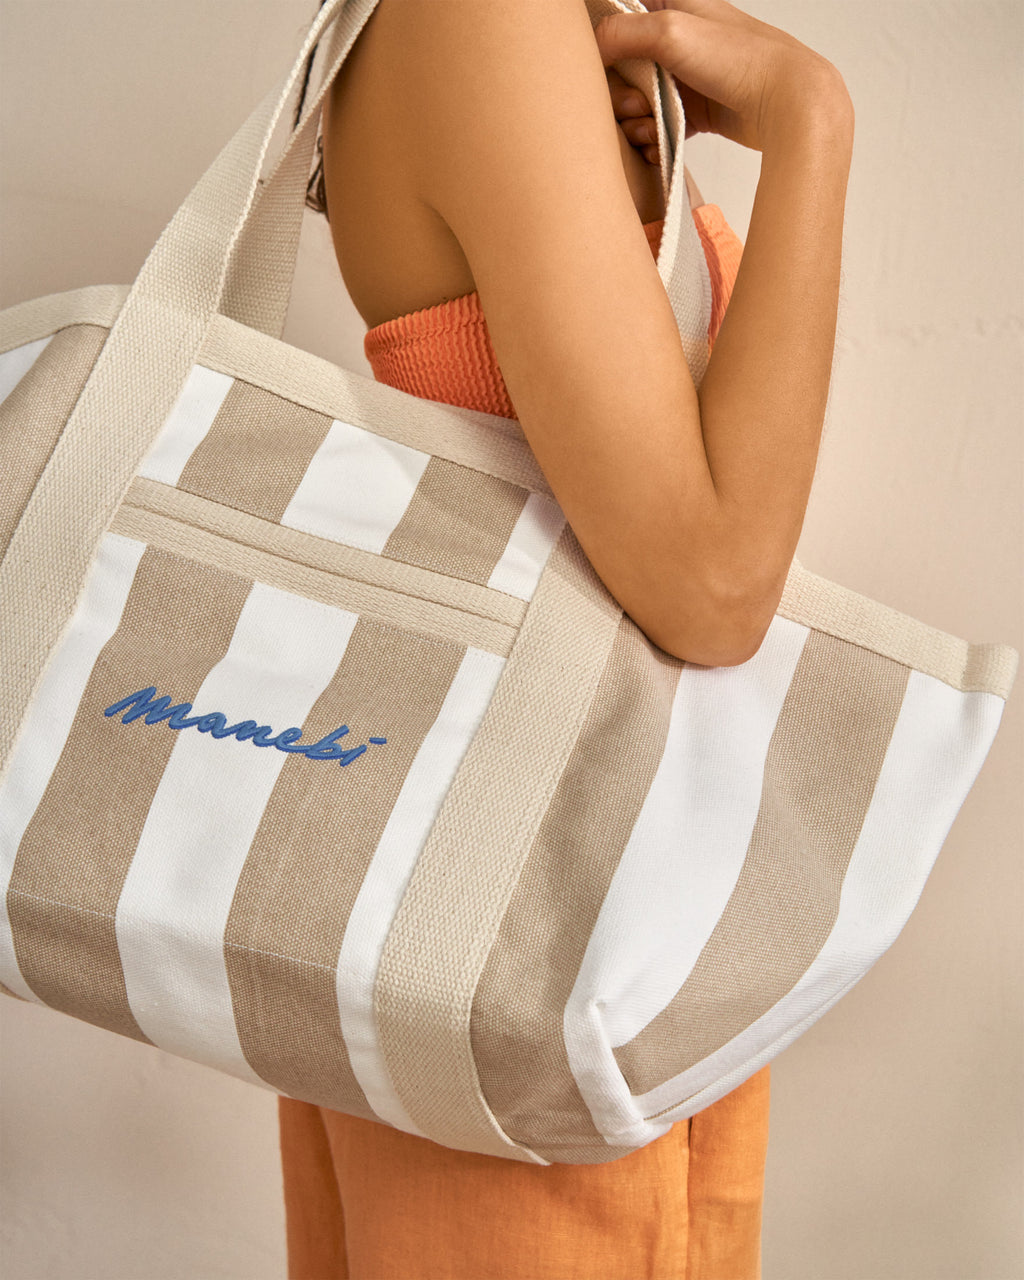 Canvas Tote Bag - Embroidered Logo - White And Beige Stripes